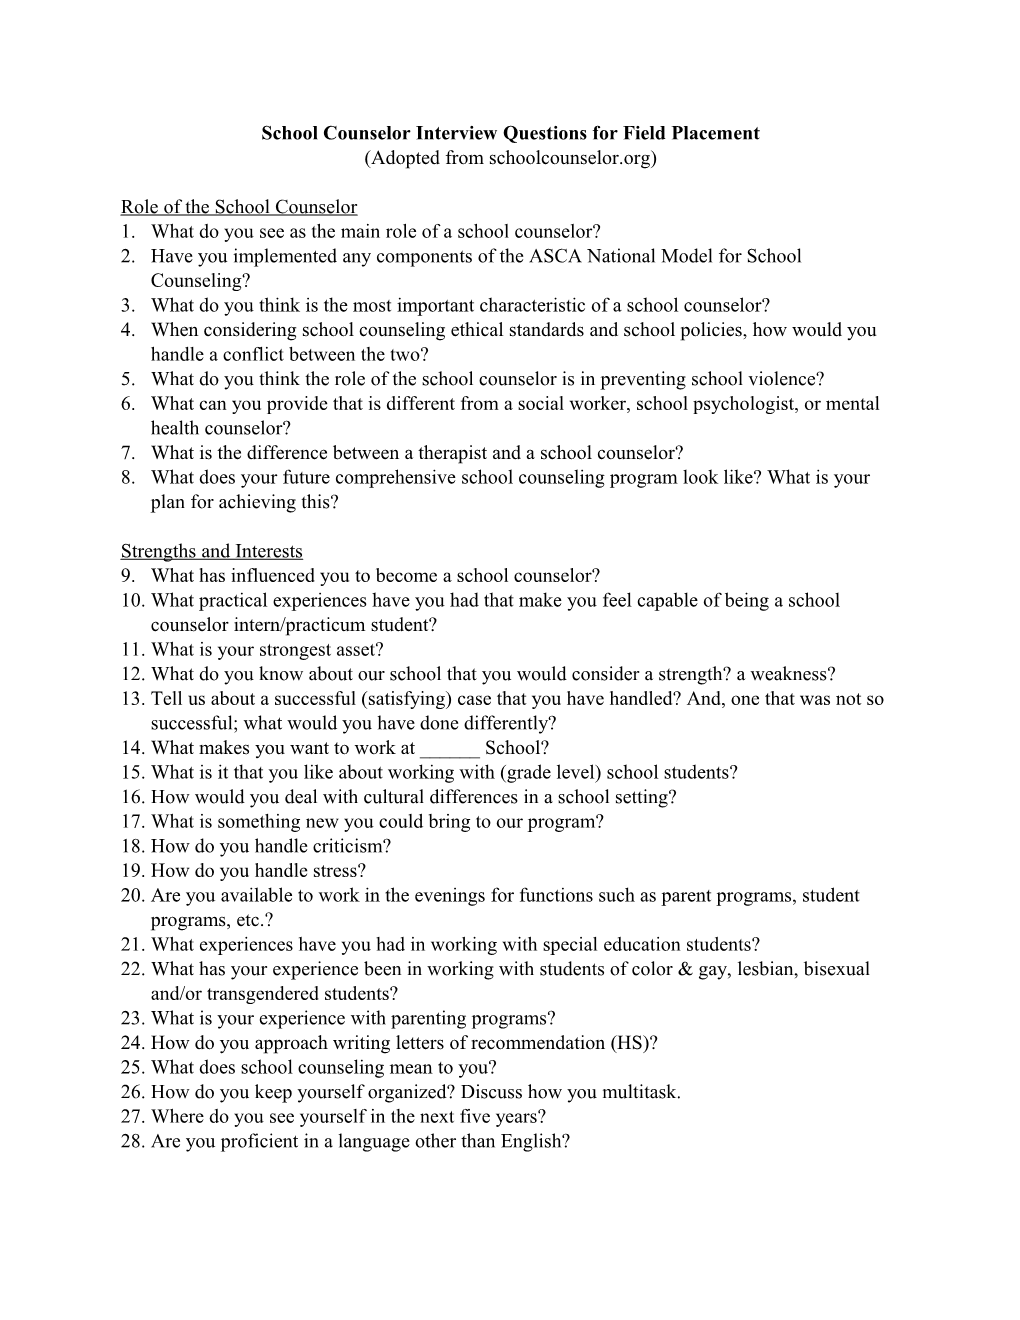 School Counselor Interview Questions for Field Placement